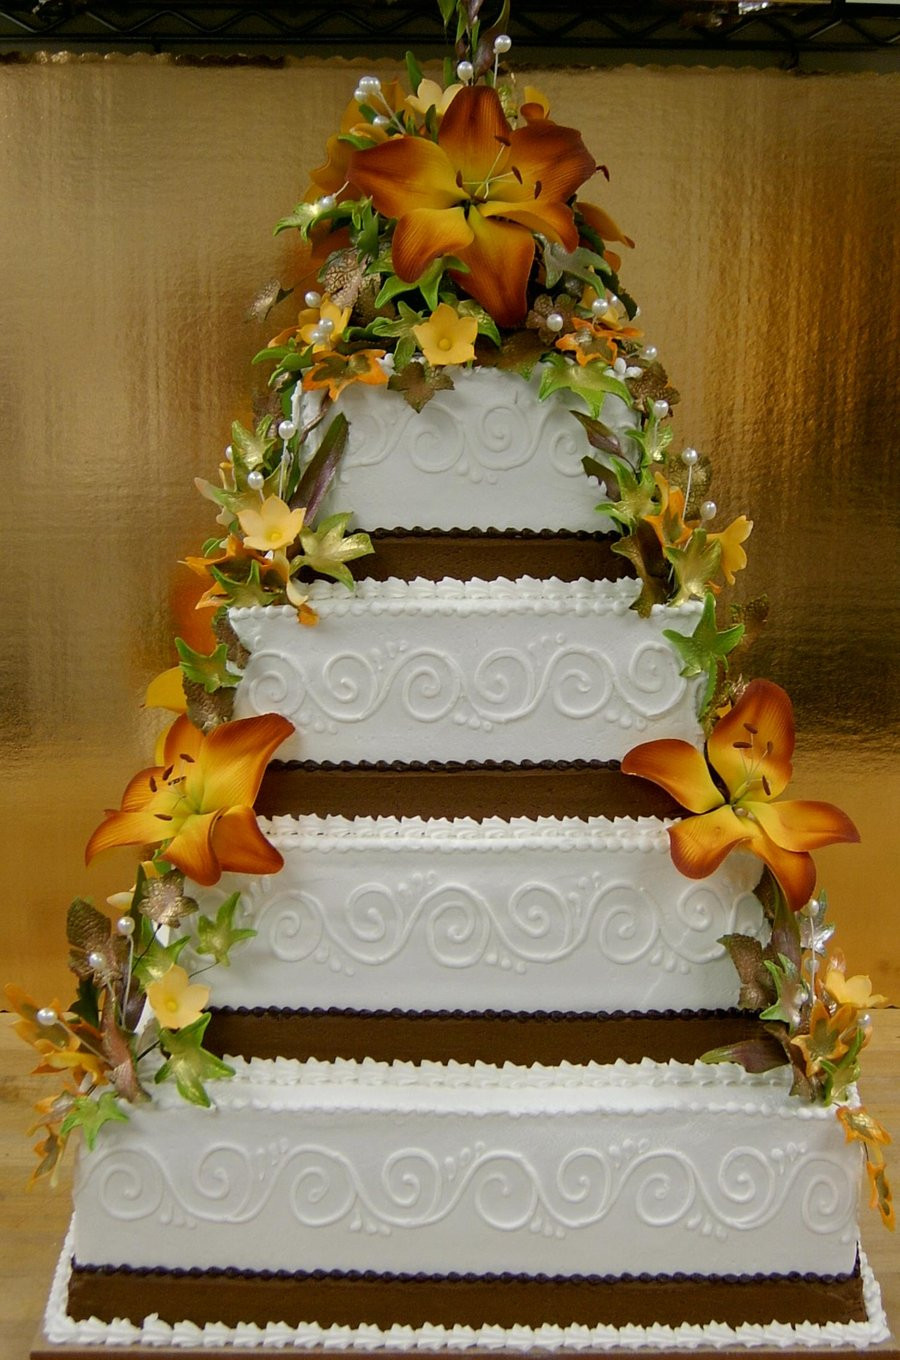 Wedding Cakes For Fall
 Fall themed wedding cake by The EvIl Plankton on DeviantArt